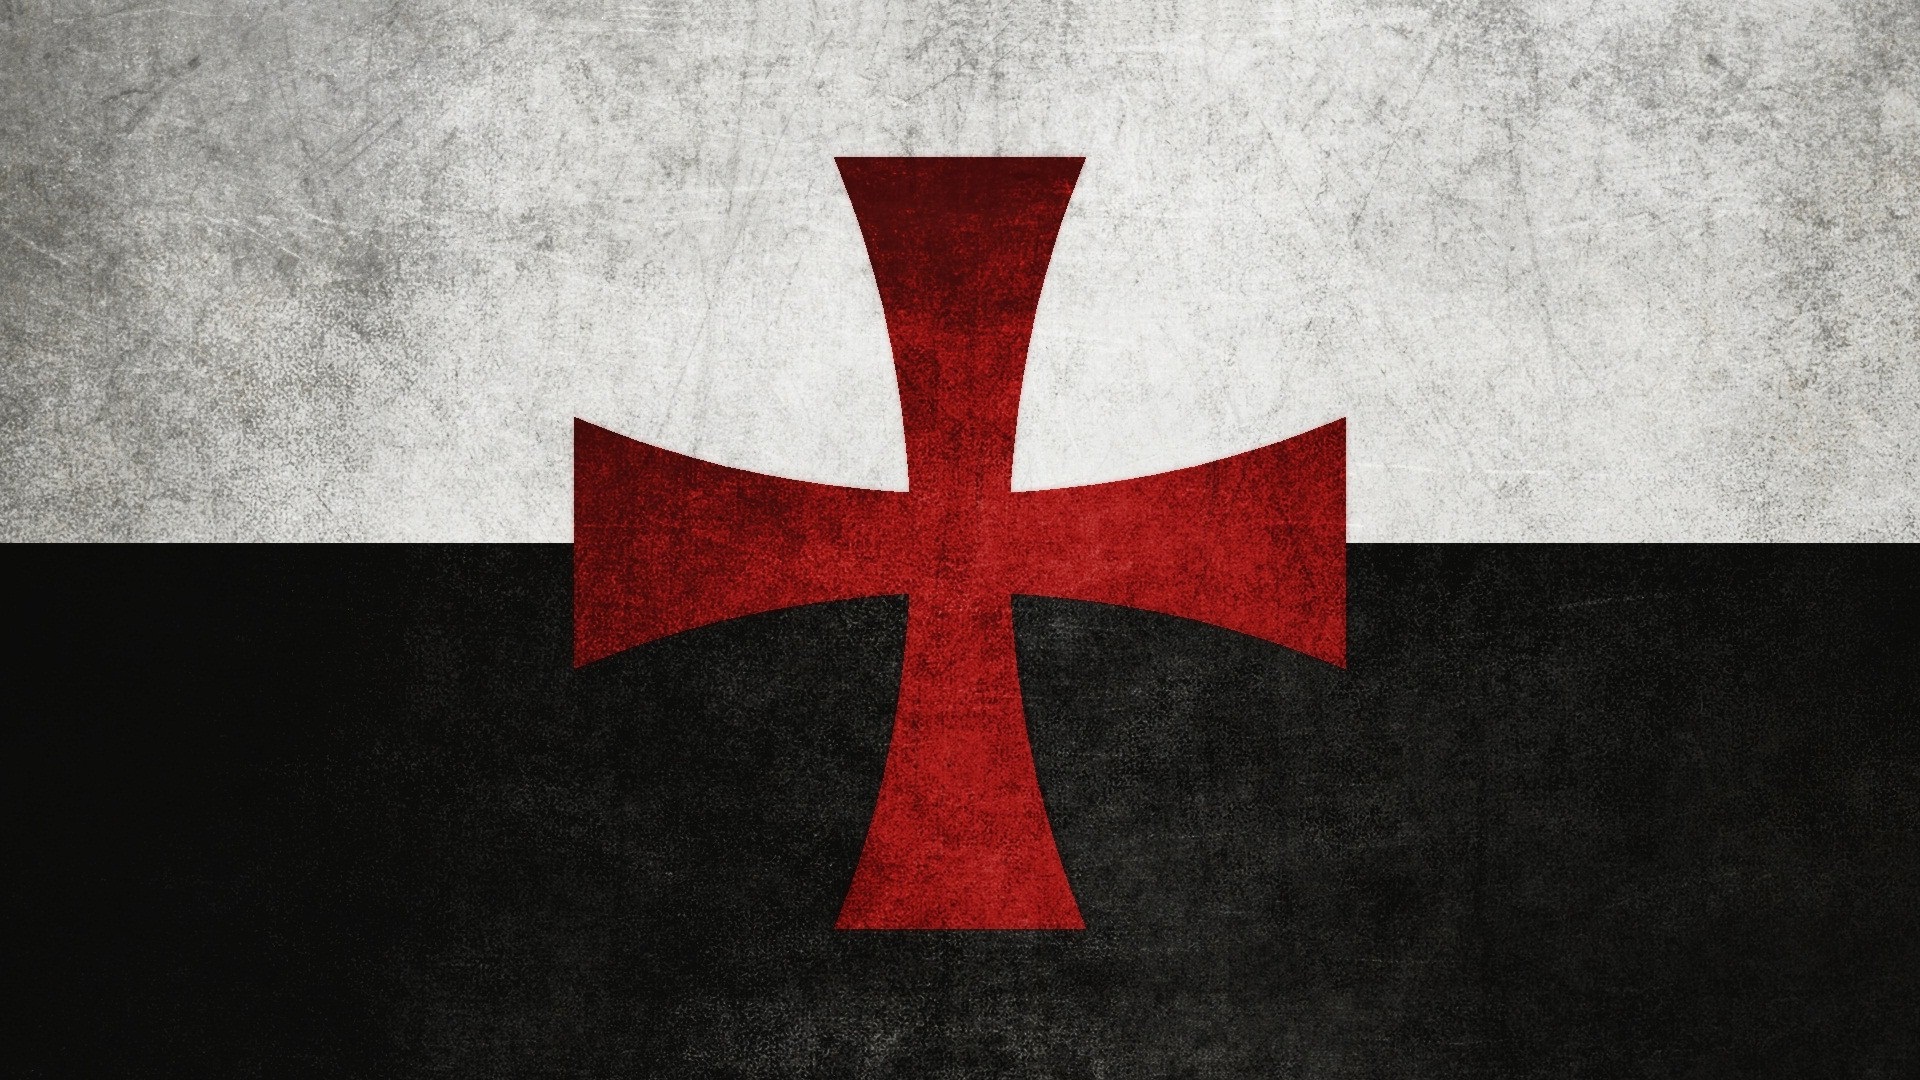 121718-07-History-Medieval-Middle-Ages-Knights-Templar.jpg